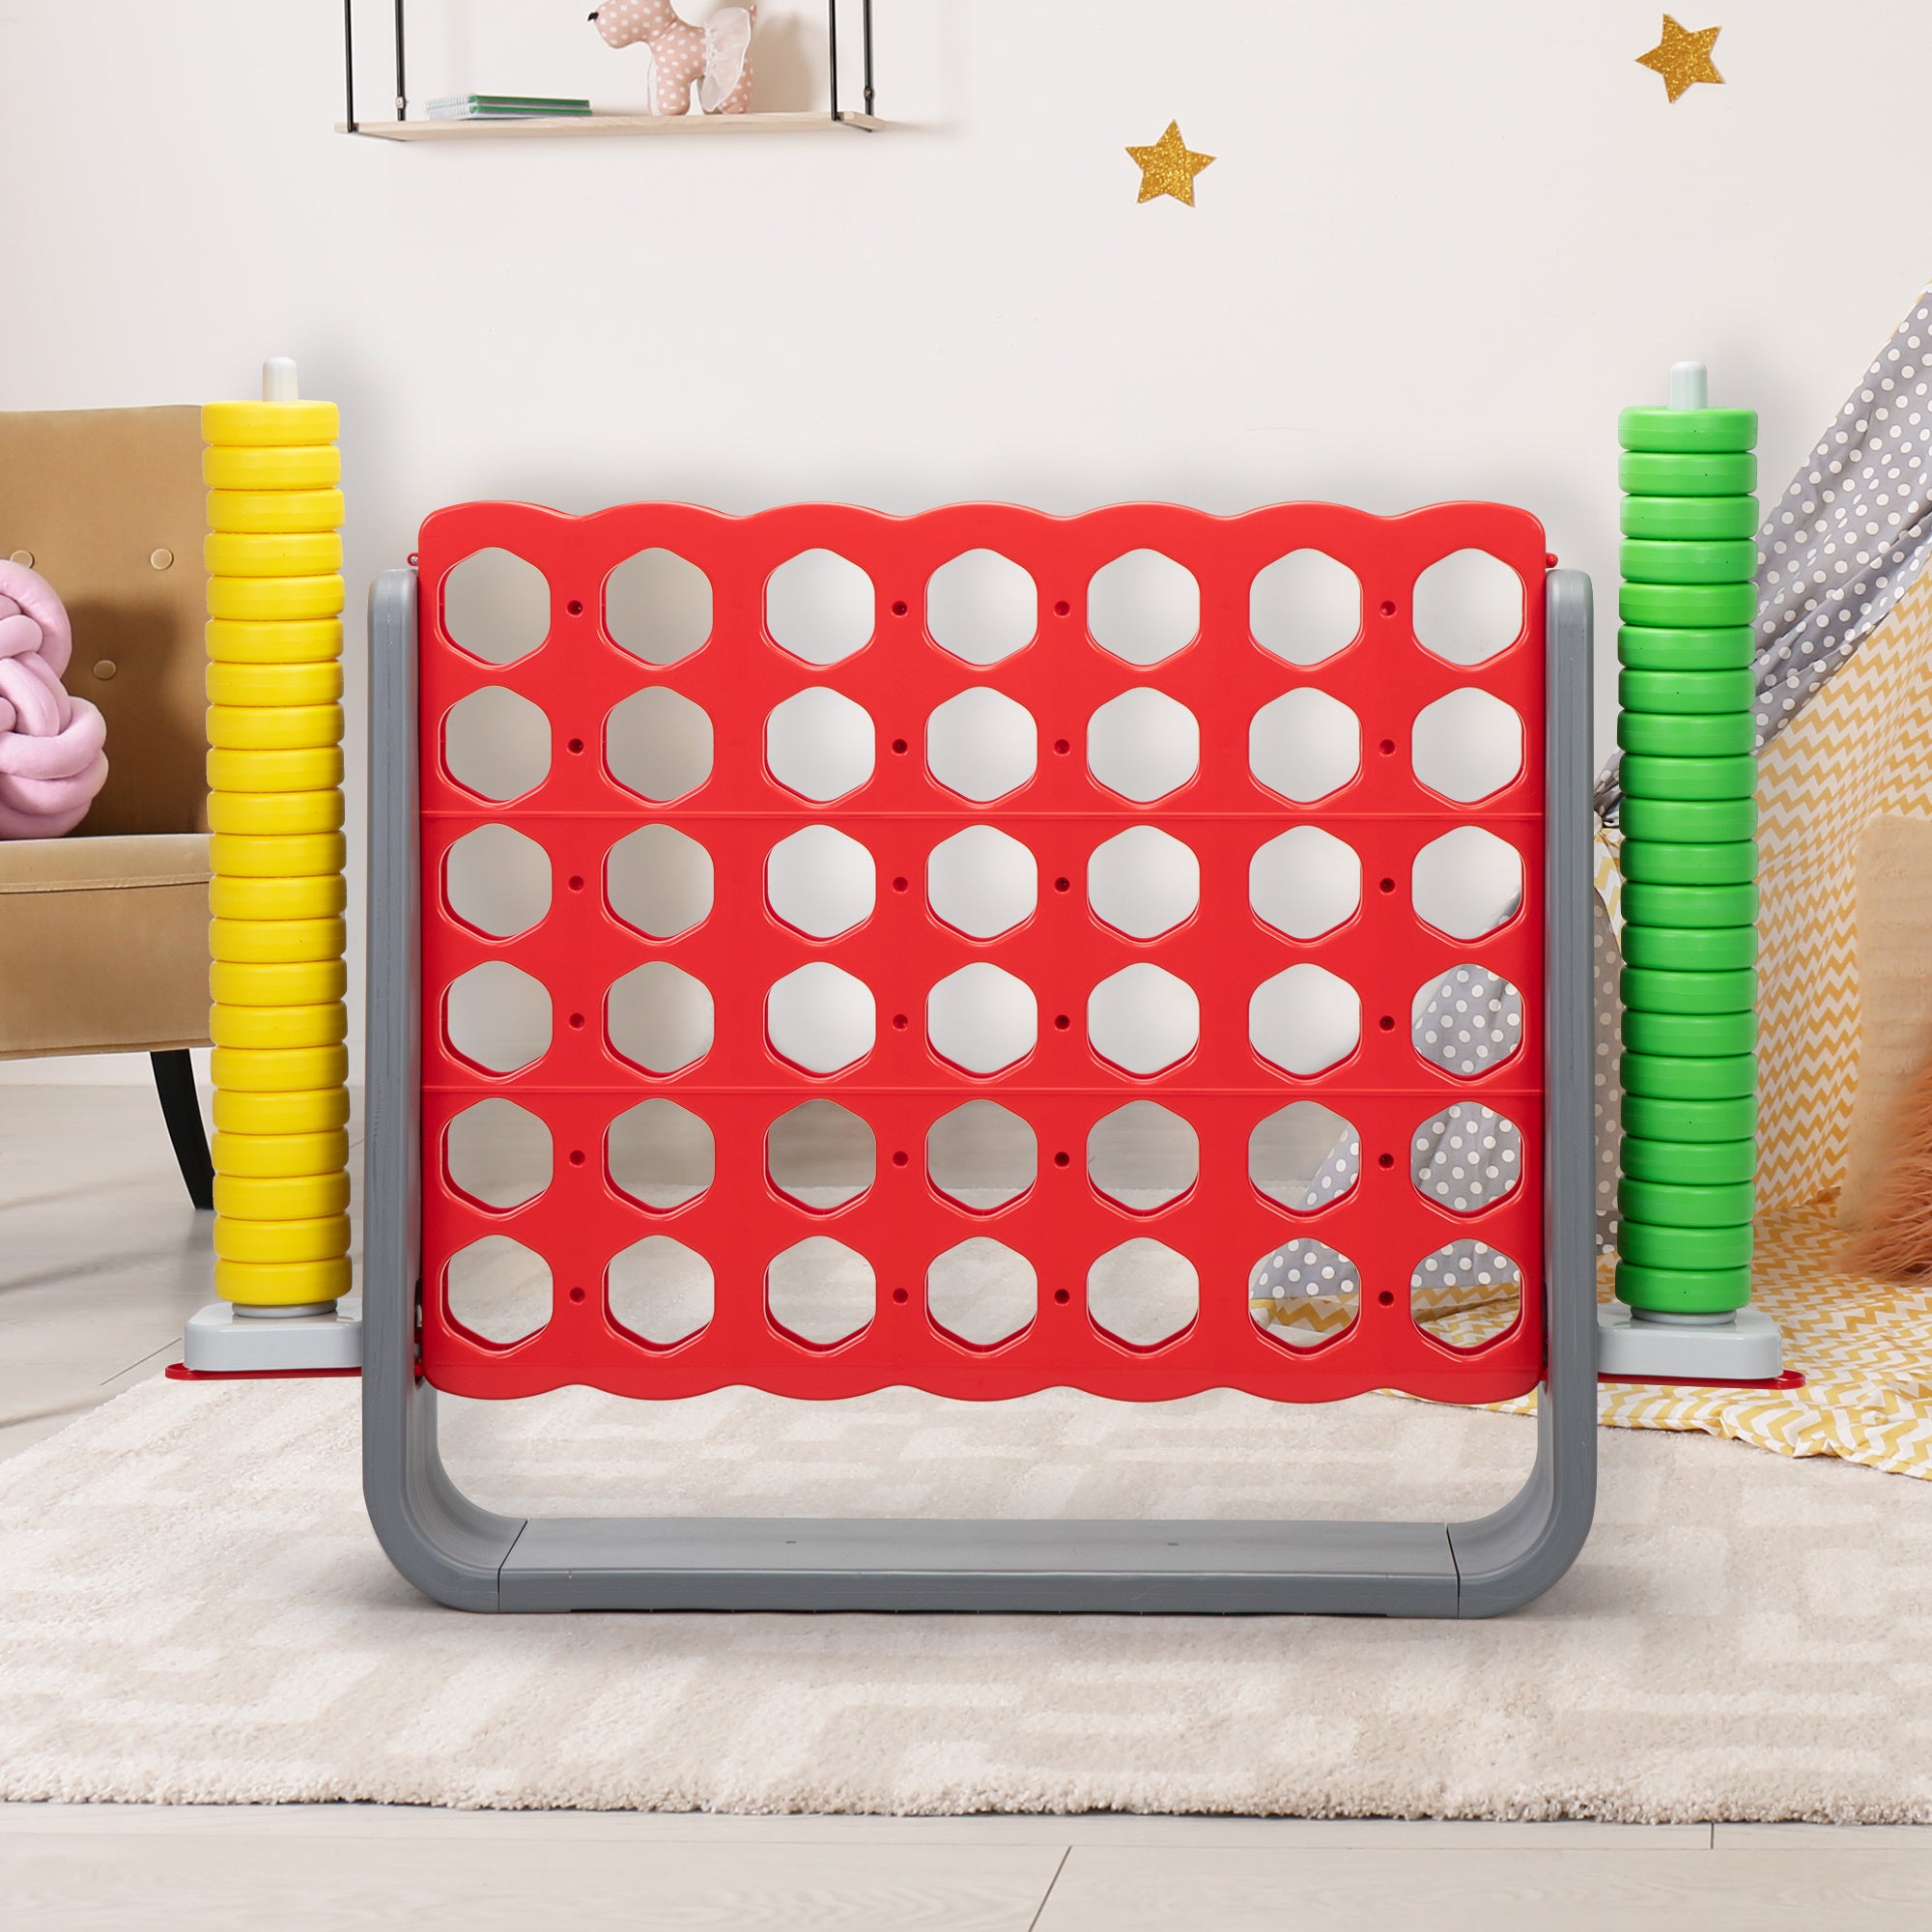 A premium Jumbo 4-to-Score Game Set designed for intellectual development, made with safe materials, all showcased on a white background.